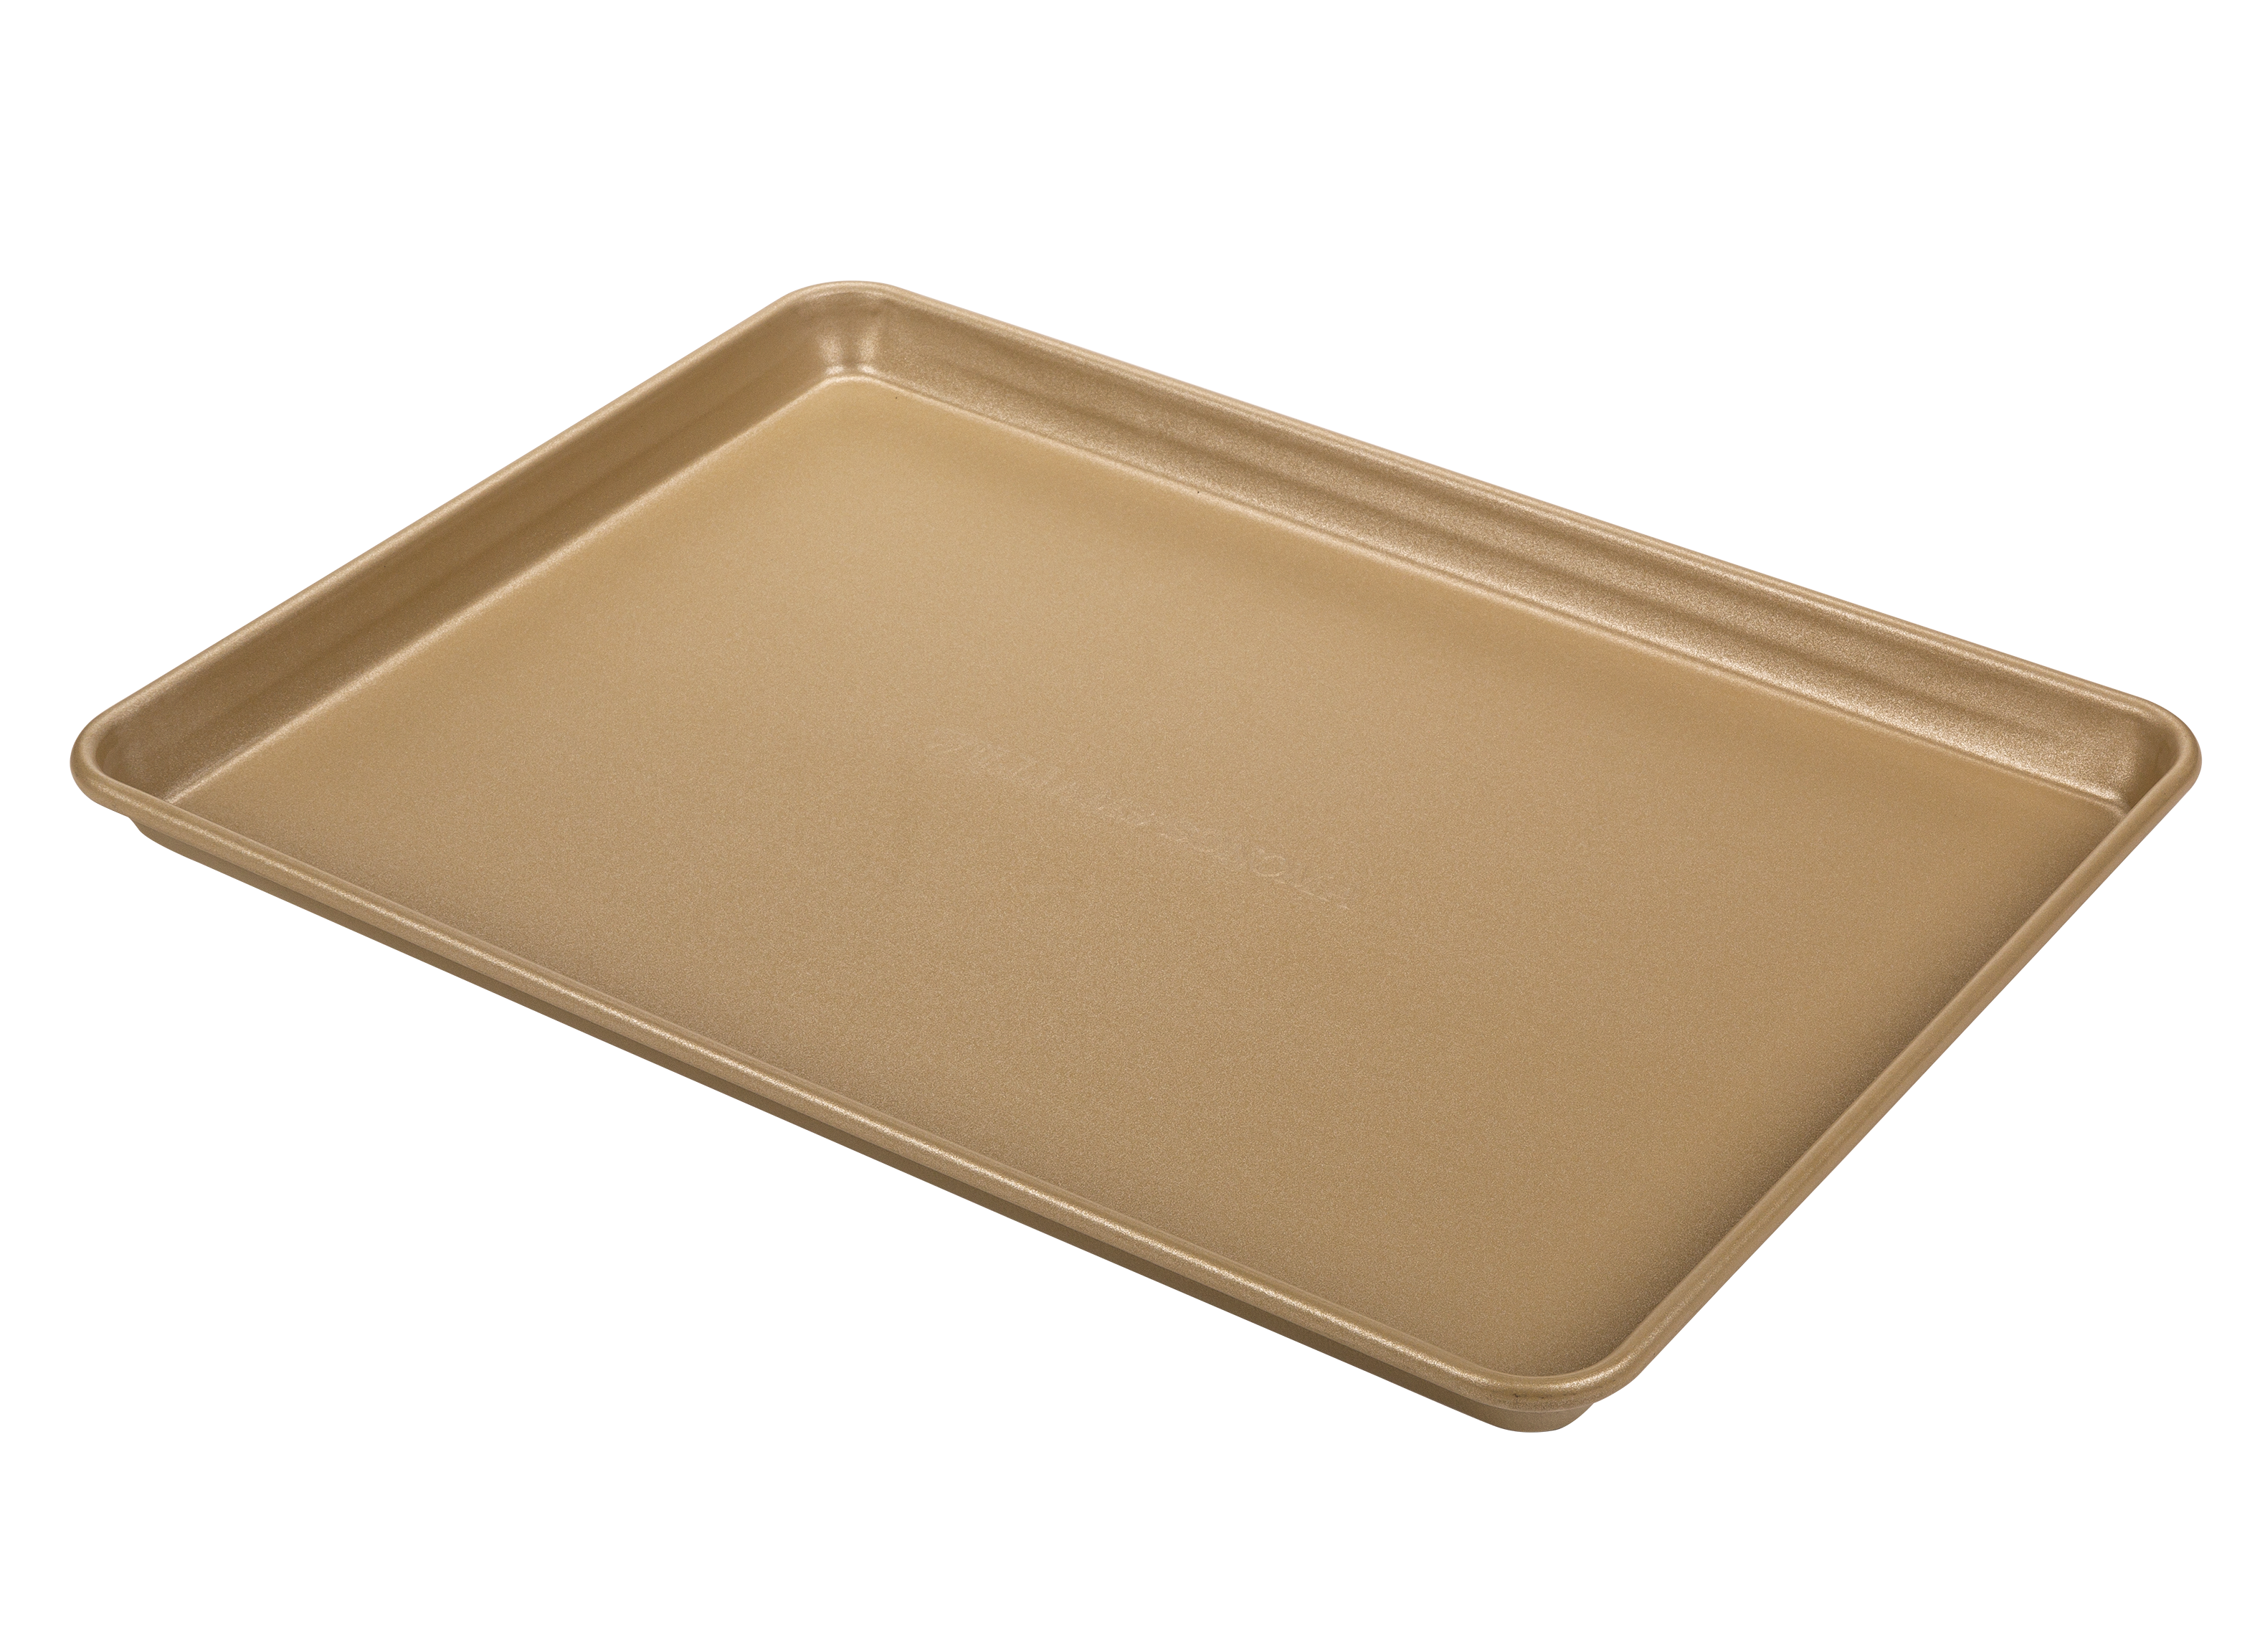 https://crdms.images.consumerreports.org/prod/products/cr/models/404174-sheet-pans-williams-sonoma-goldtouch-pro-nonstick-non-corrugated-half-sheet-10022108.png